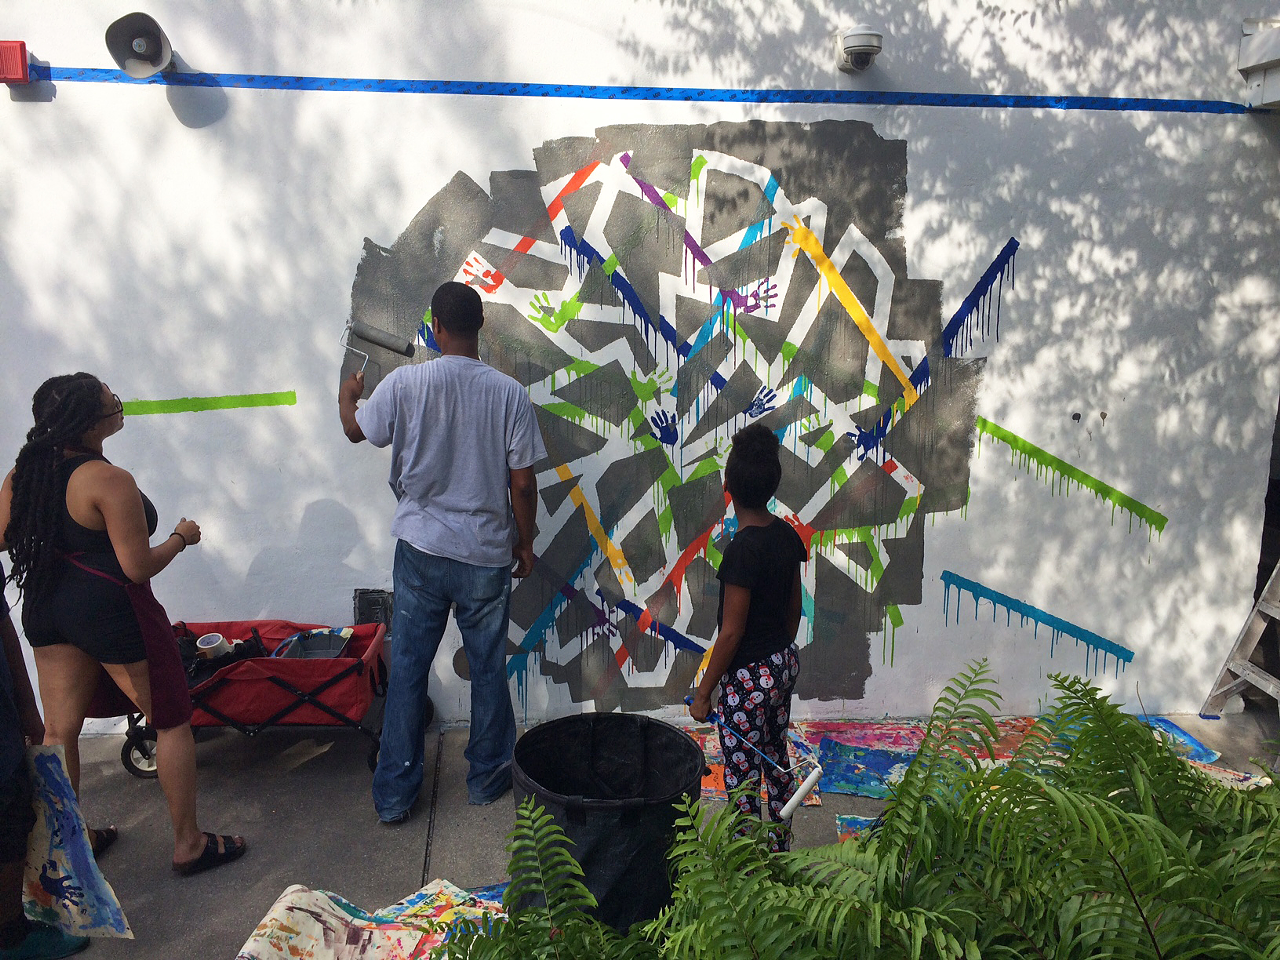 The next layer: Ya and partner work on their portion of the mural.